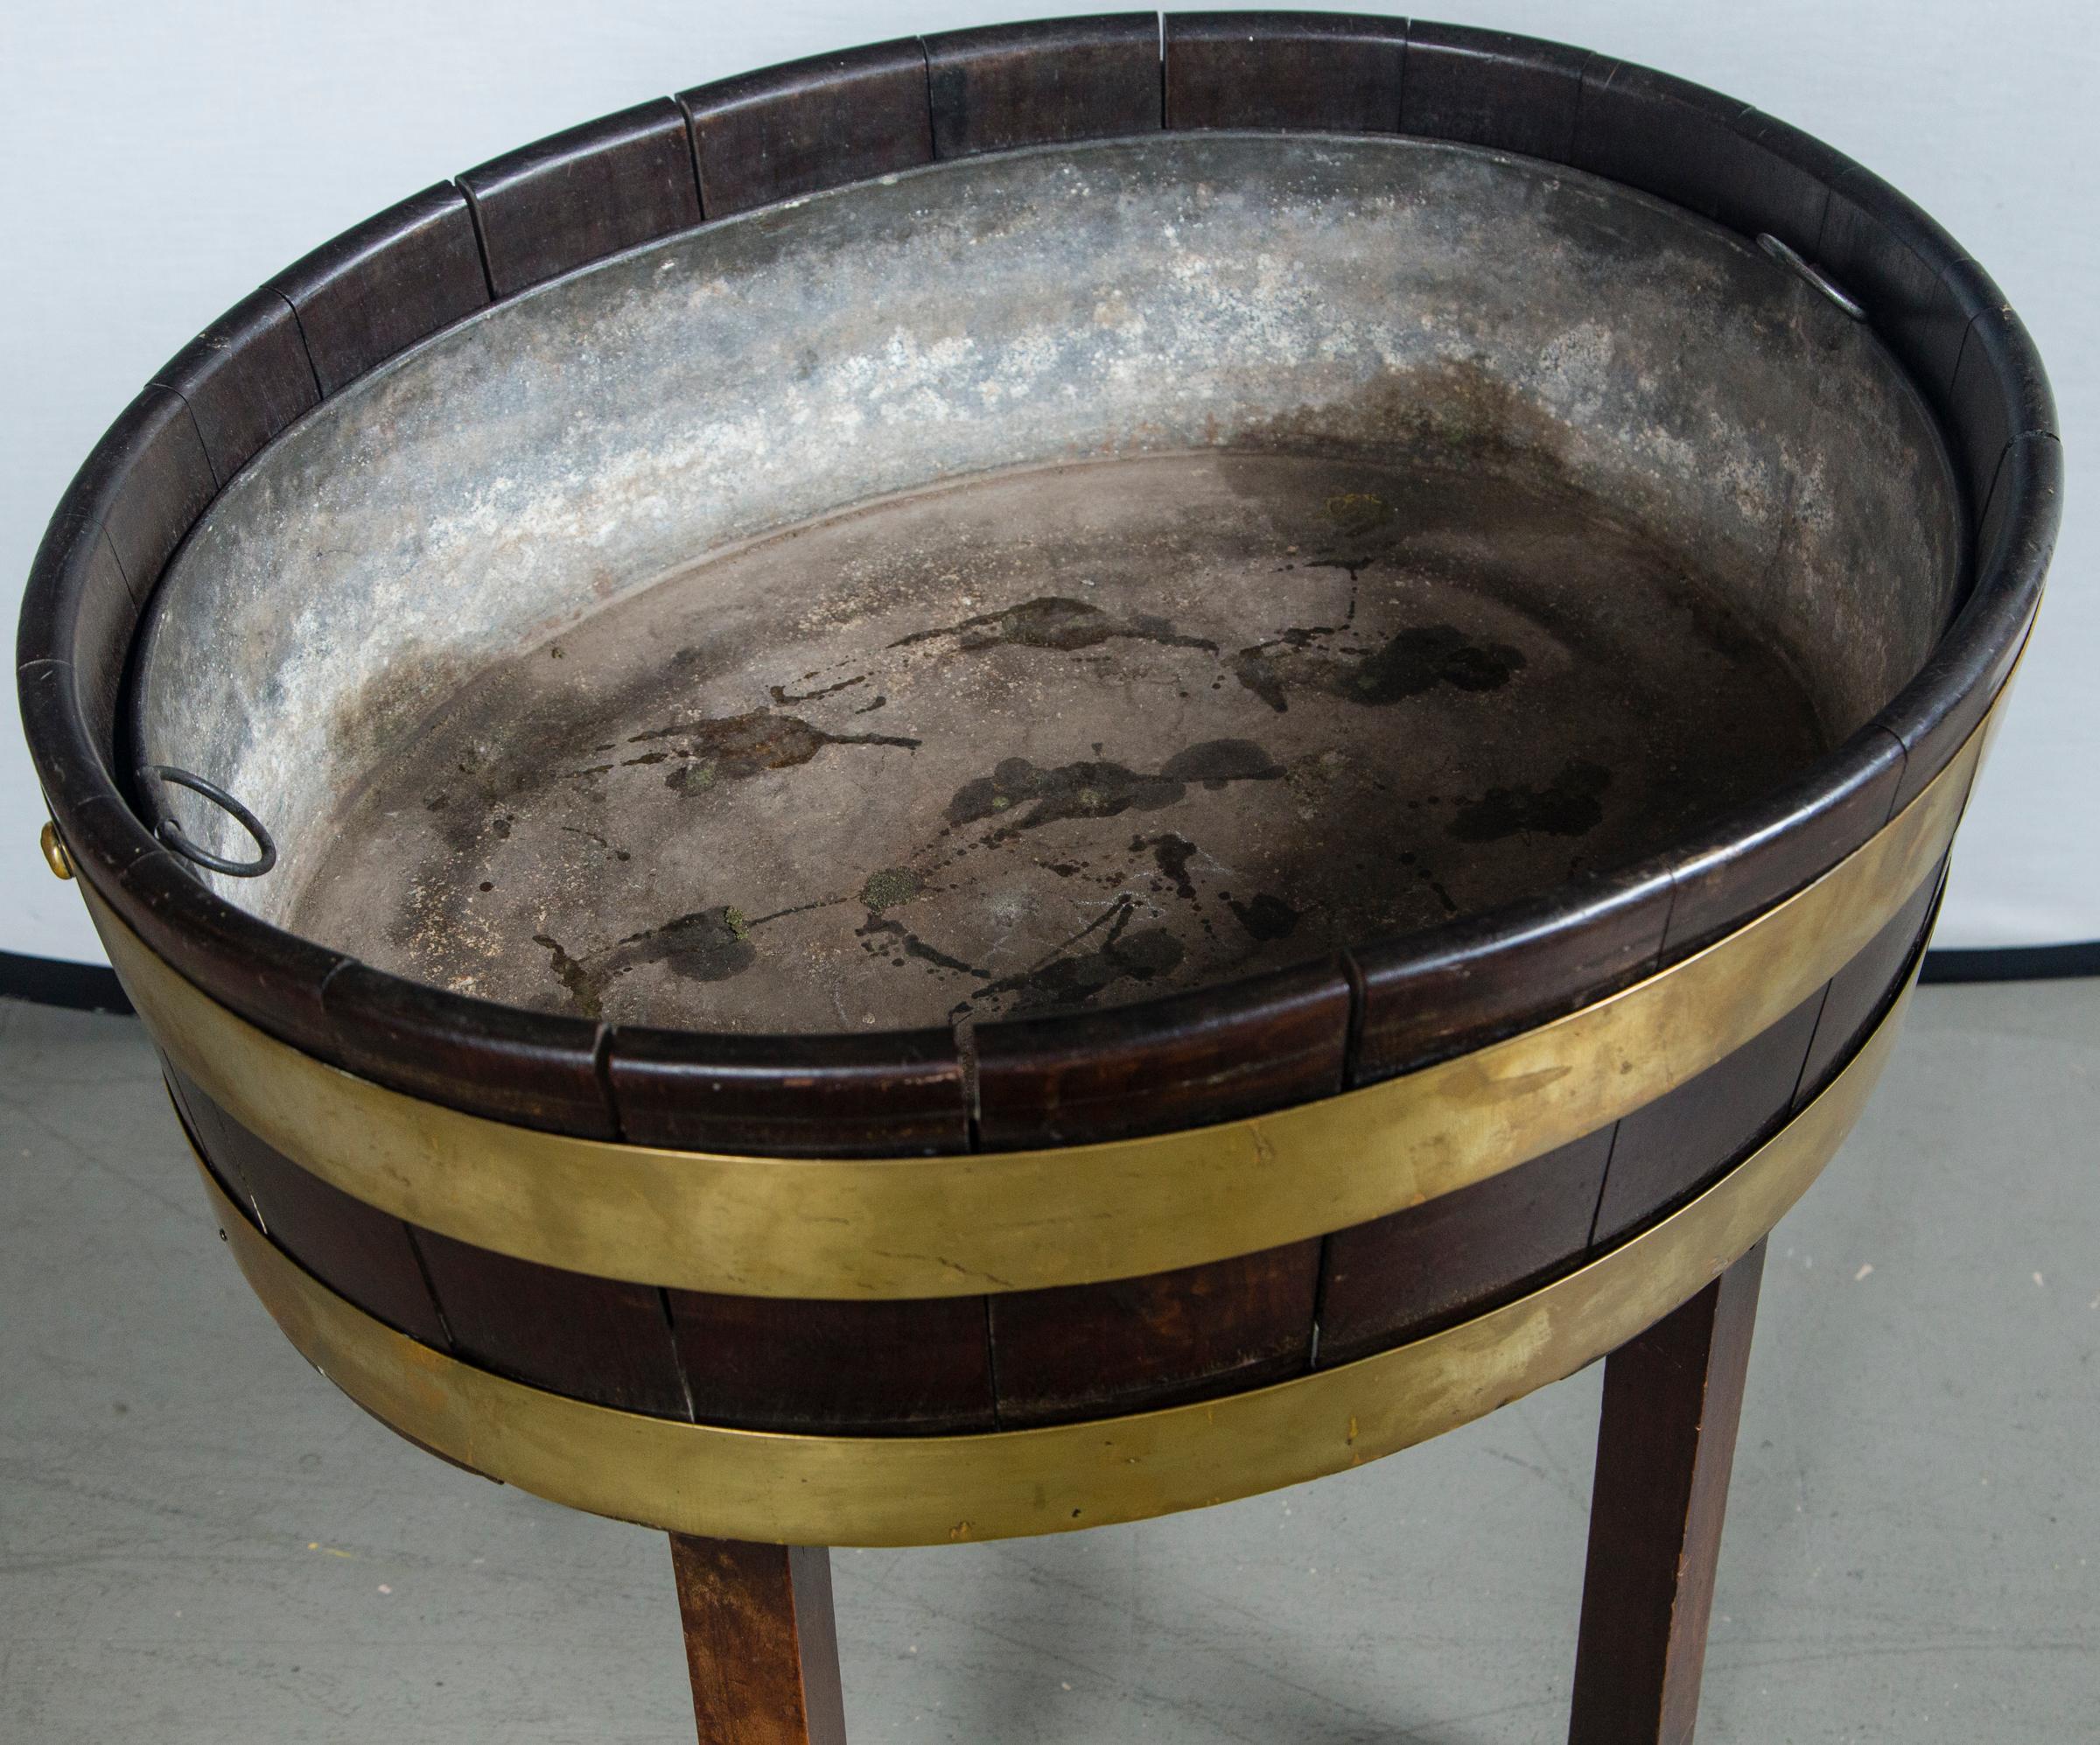 Oval brass banded antique mahogany wine cooler with original tin liner on stand, circa 1880.